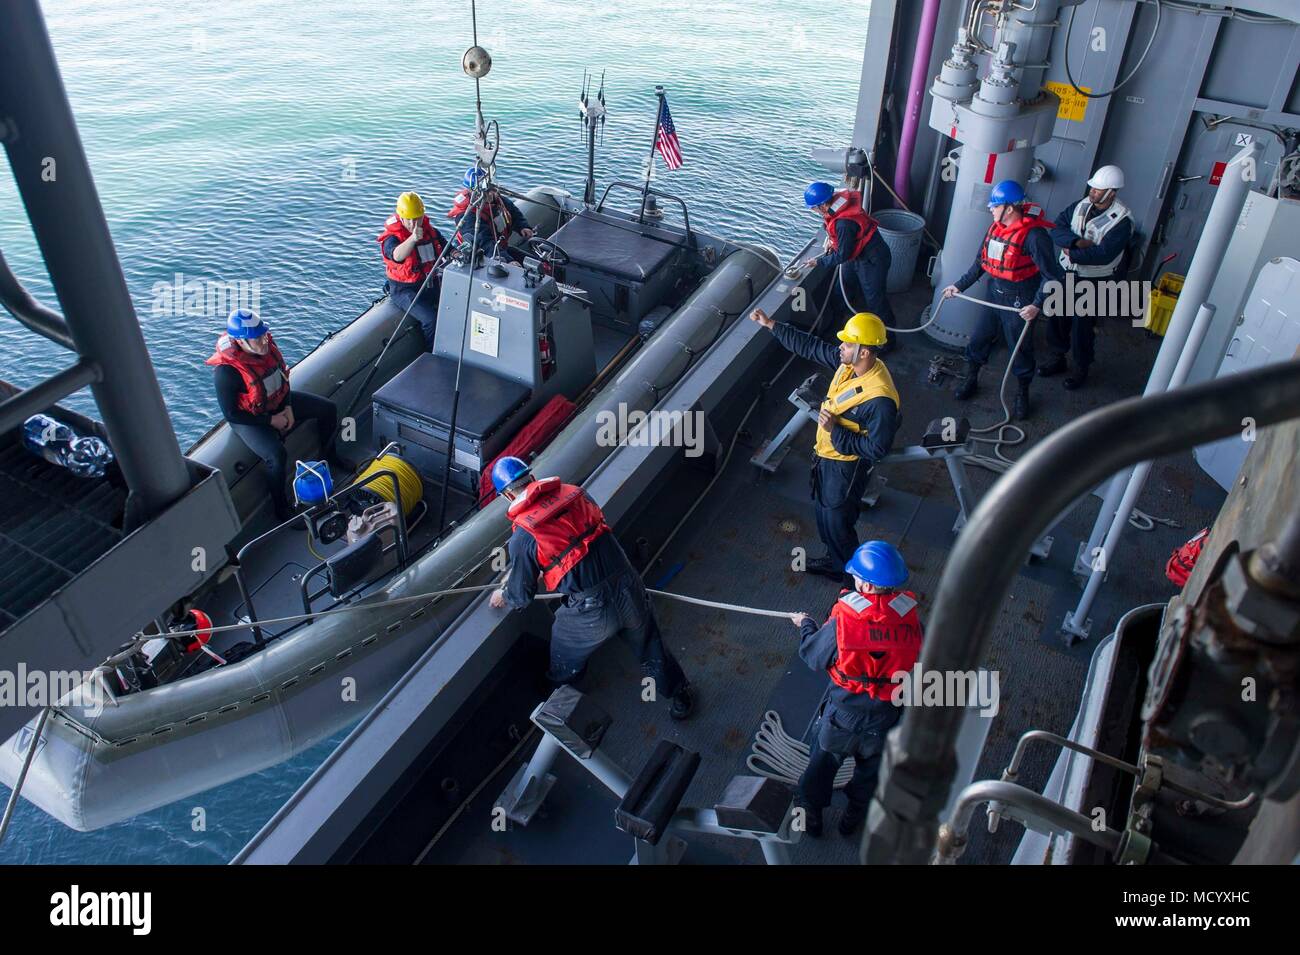 180306-N-ZS023-012 PACIFIC OCEAN (March 6, 2018) Sailors aboard the amphibious assault ship USS America (LHA 6) lower a rigid-hulled inflatable boat using the ship’s starboard davit. America is underway off the coast of southern California conducting an ammunitions offload prior to entering a planned maintenance availability period. (U.S. Navy photo by Mass Communication Specialist 3rd Class Vance Hand/Released) Stock Photo